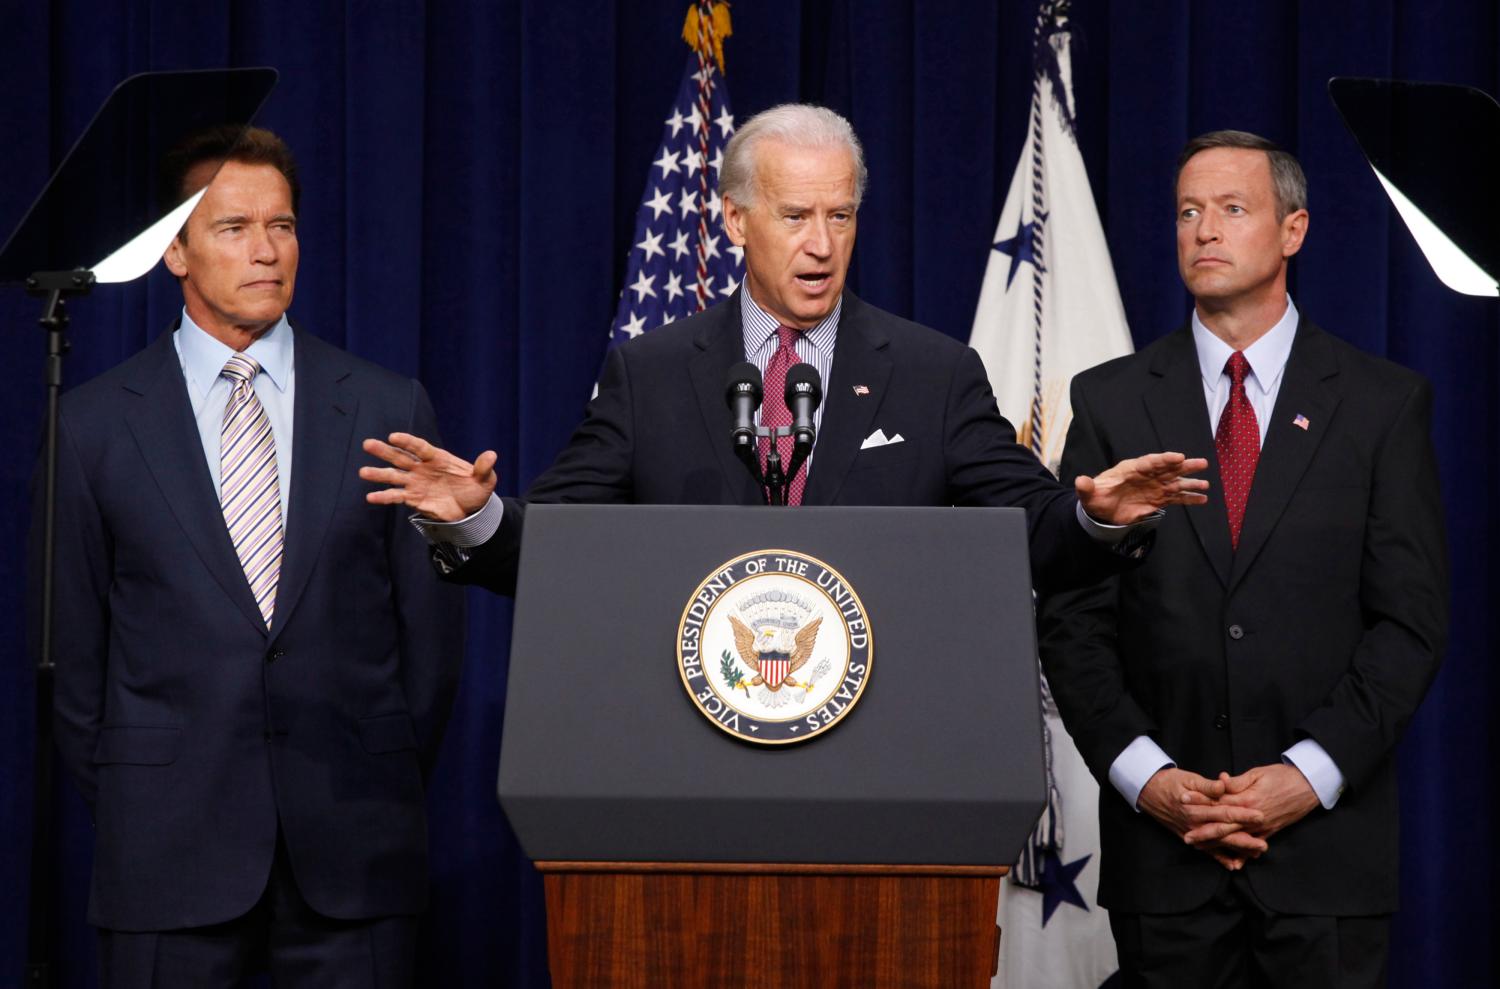 U.S. Vice President Joe Biden discusses the American Recovery and Reinvestment Act to an audience alongside California Governor Arnold Schwarzenegger (L) and Maryland Governor Martin O'Malley in the Eisenhower Executive Office building in Washington